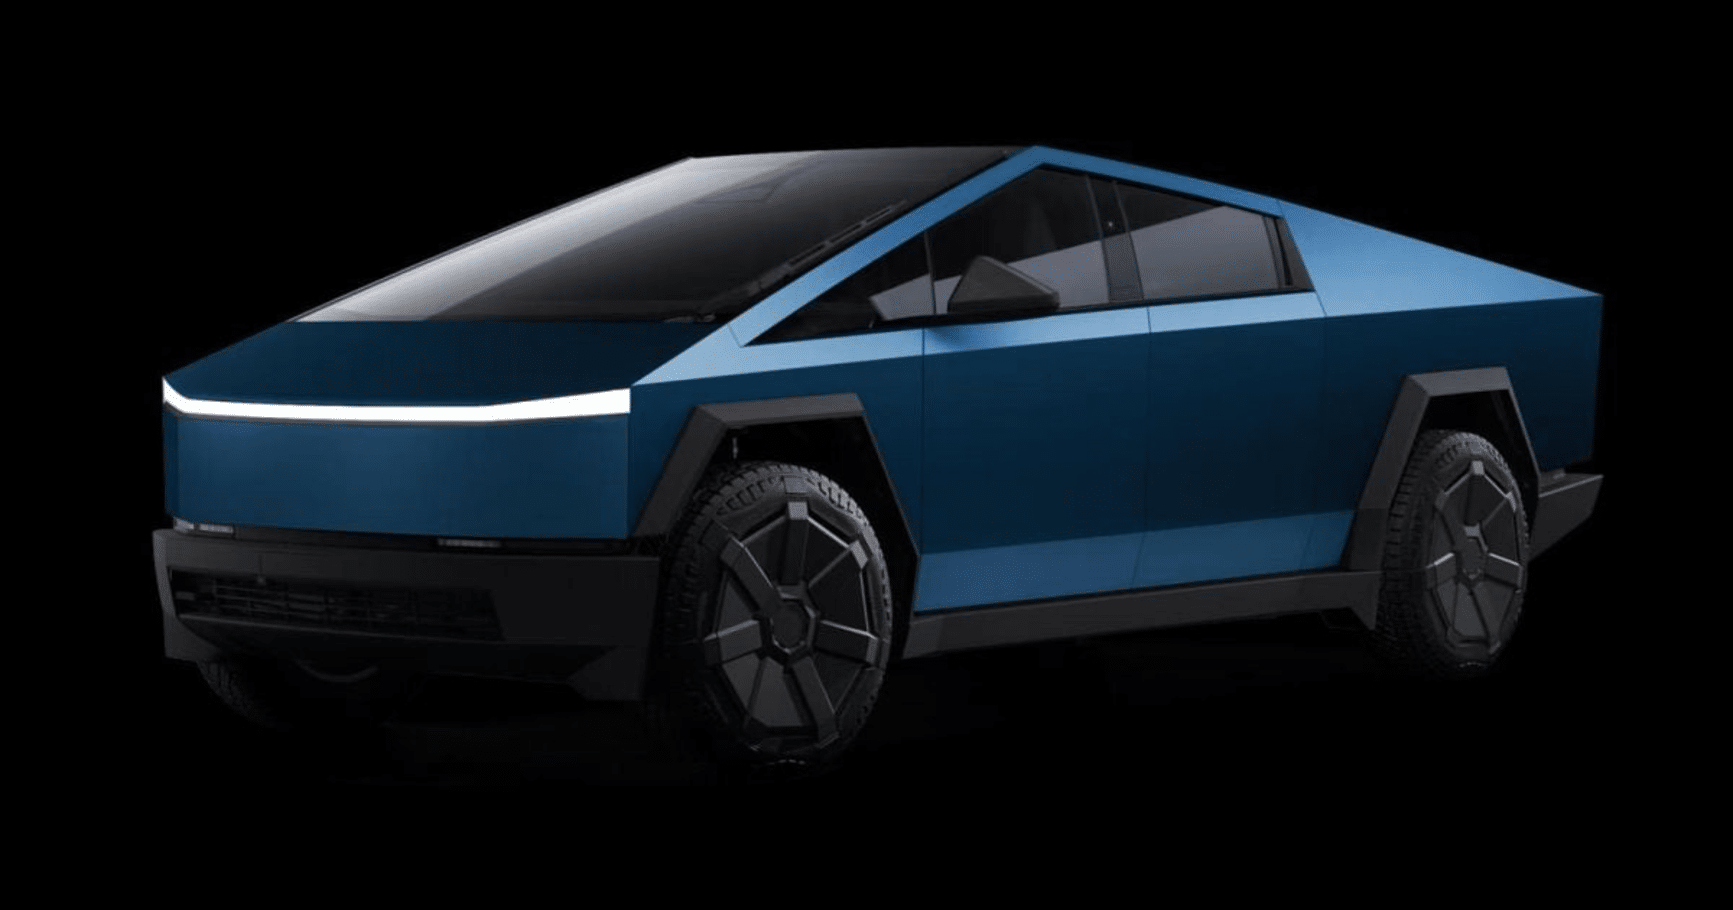 Tesla Offers Vinyl Wraps to Protect Cybertruck’s Stainless Steel Body